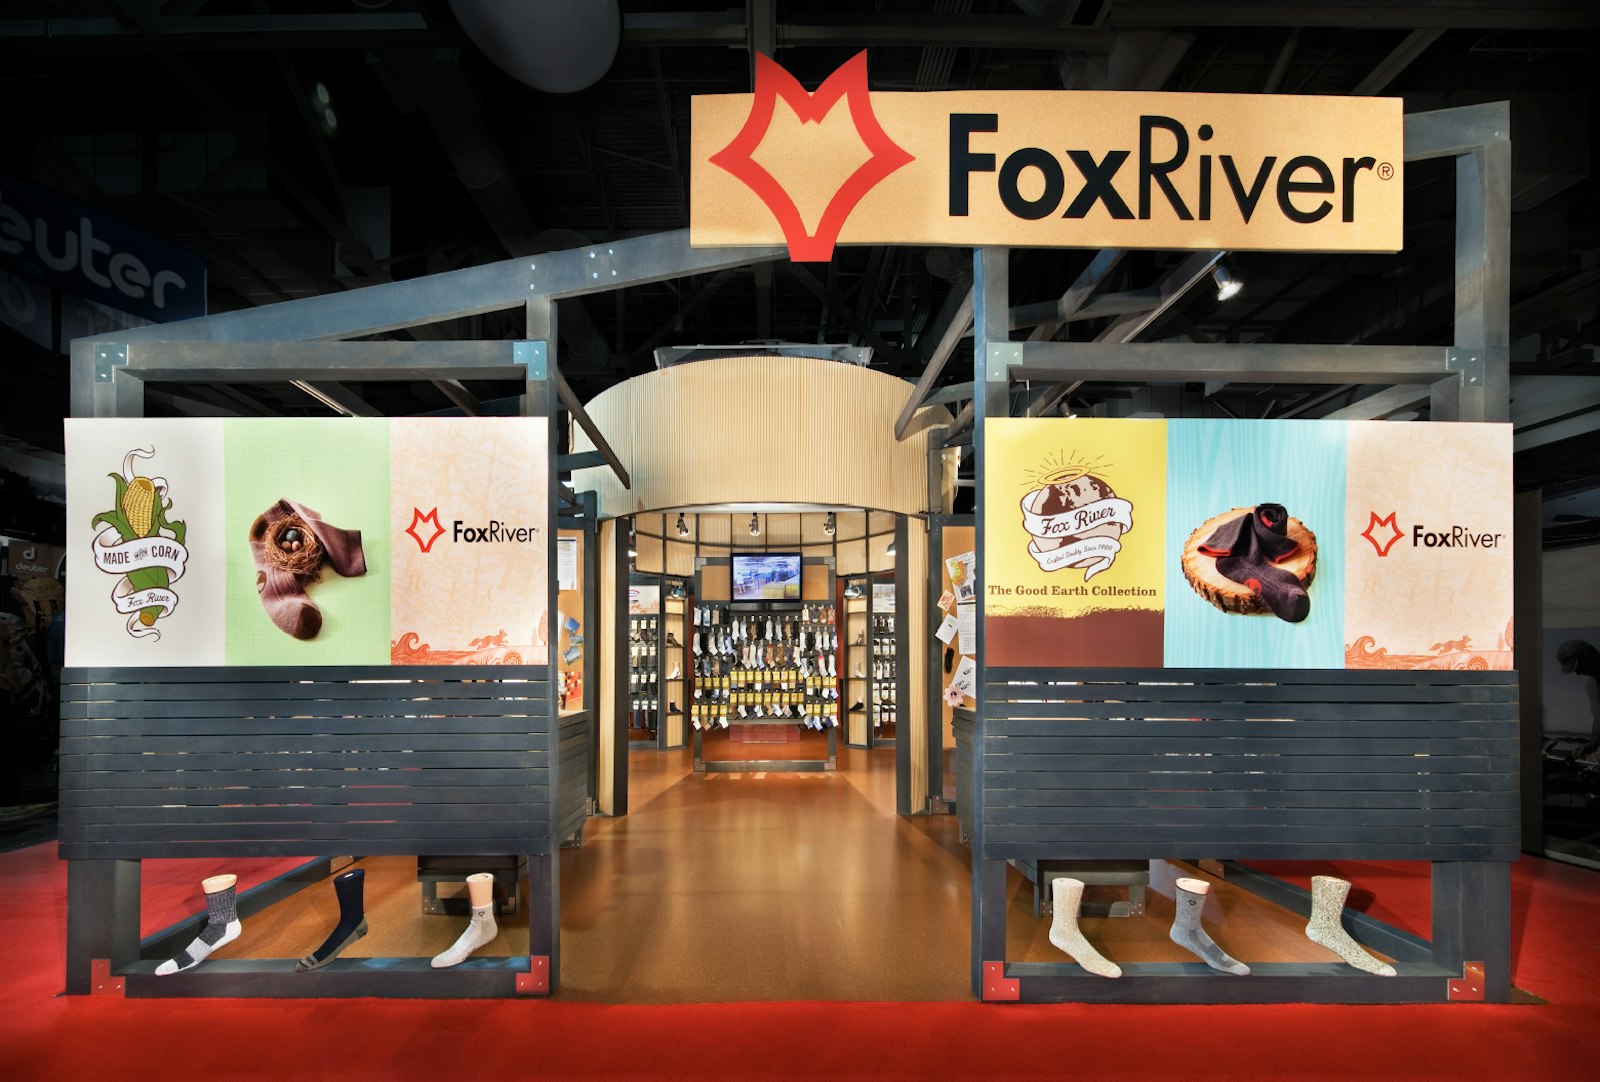 Fox River trade show booth displays with product photography and branding.